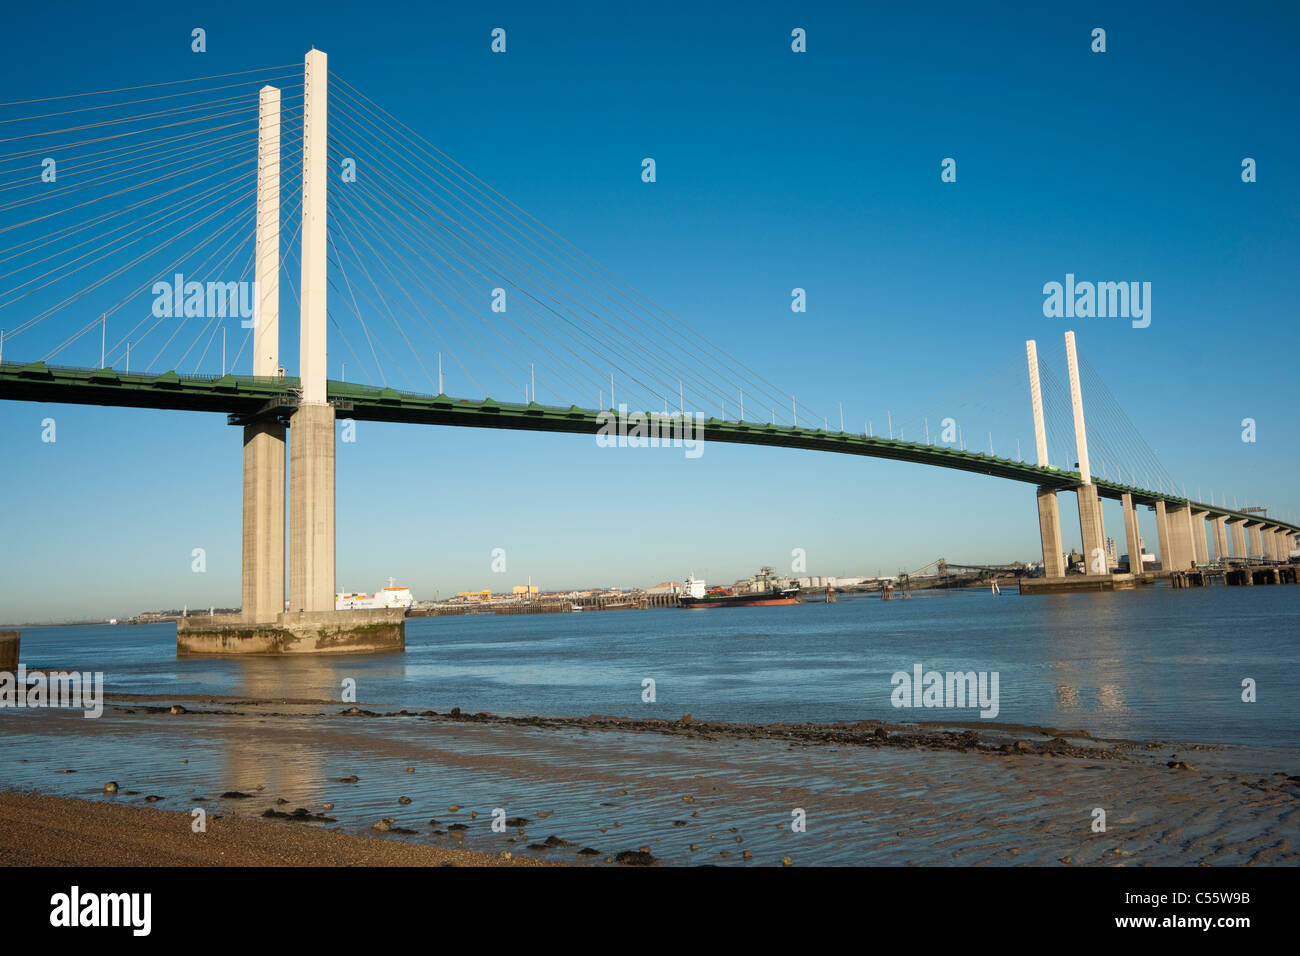 Queen Elisabeth II bridge over the river Thames, in West Thurrock, UK against a clear blue sky Stock Photo